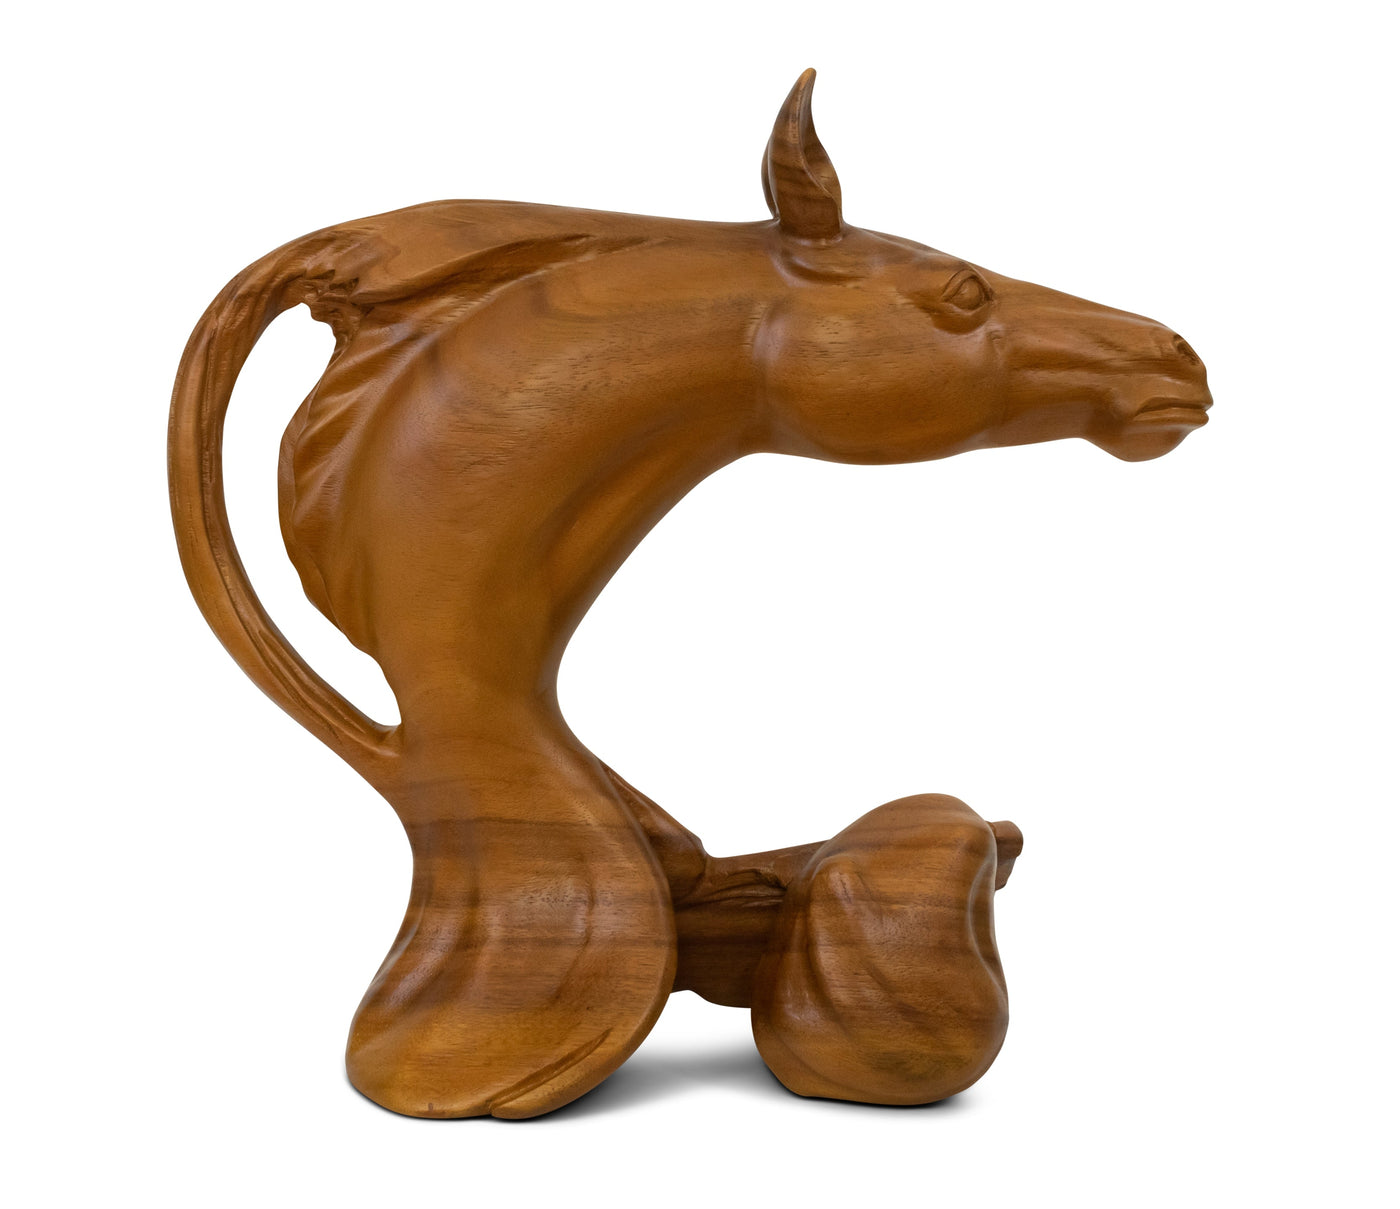 Wooden Solid Hand Carved Horse Head Abstract Sculpture Art Statue Handcrafted Handmade Decorative Home Decor Accent Wood Decoration